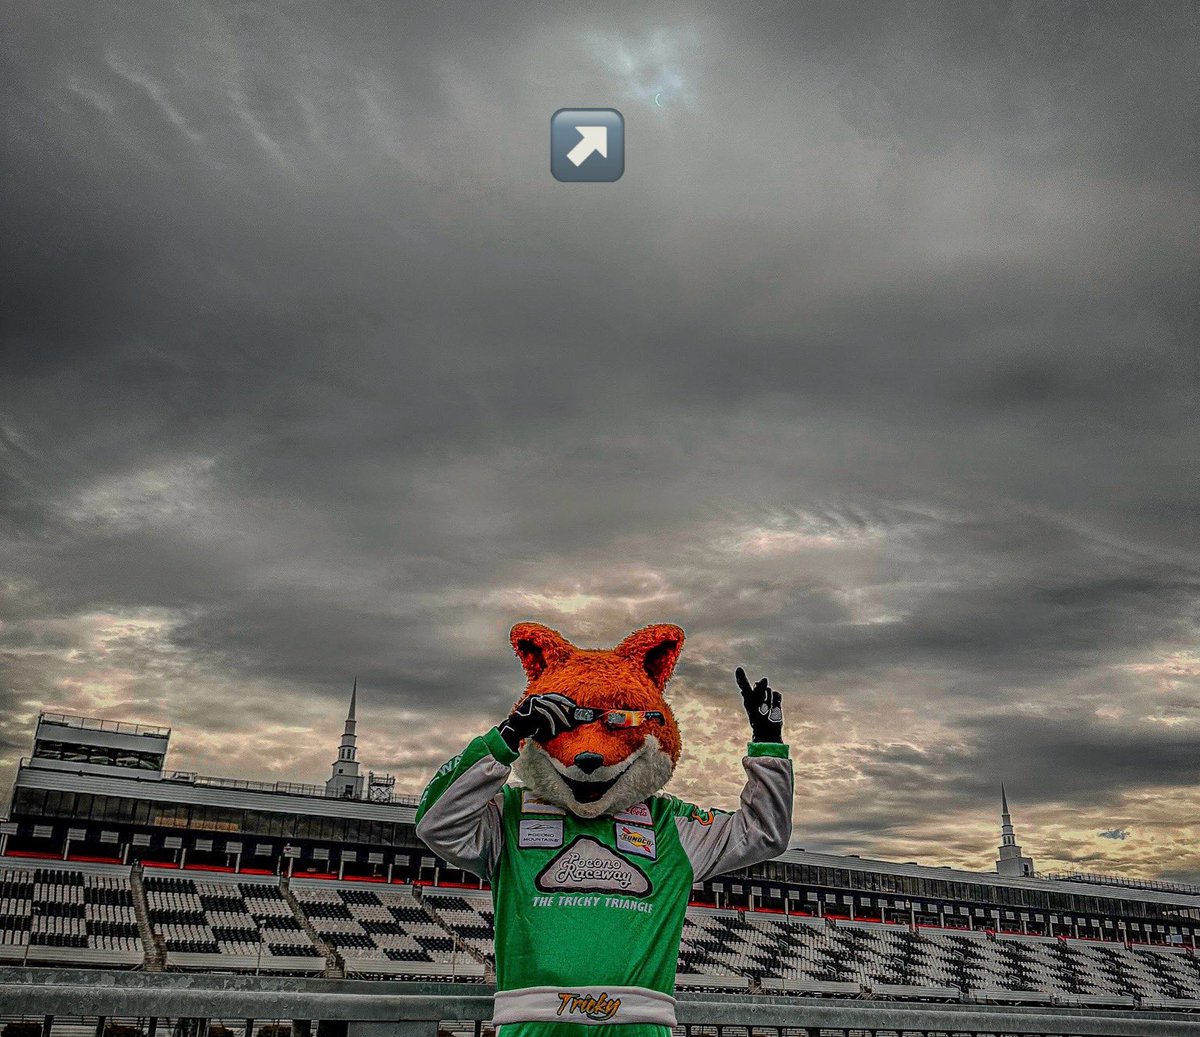 It was cloudy but Tricky still did catch a few glimpses of the Eclipse here in Long Pond! #Eclipse2024 | #PoconoMtns🌘🦊🏁